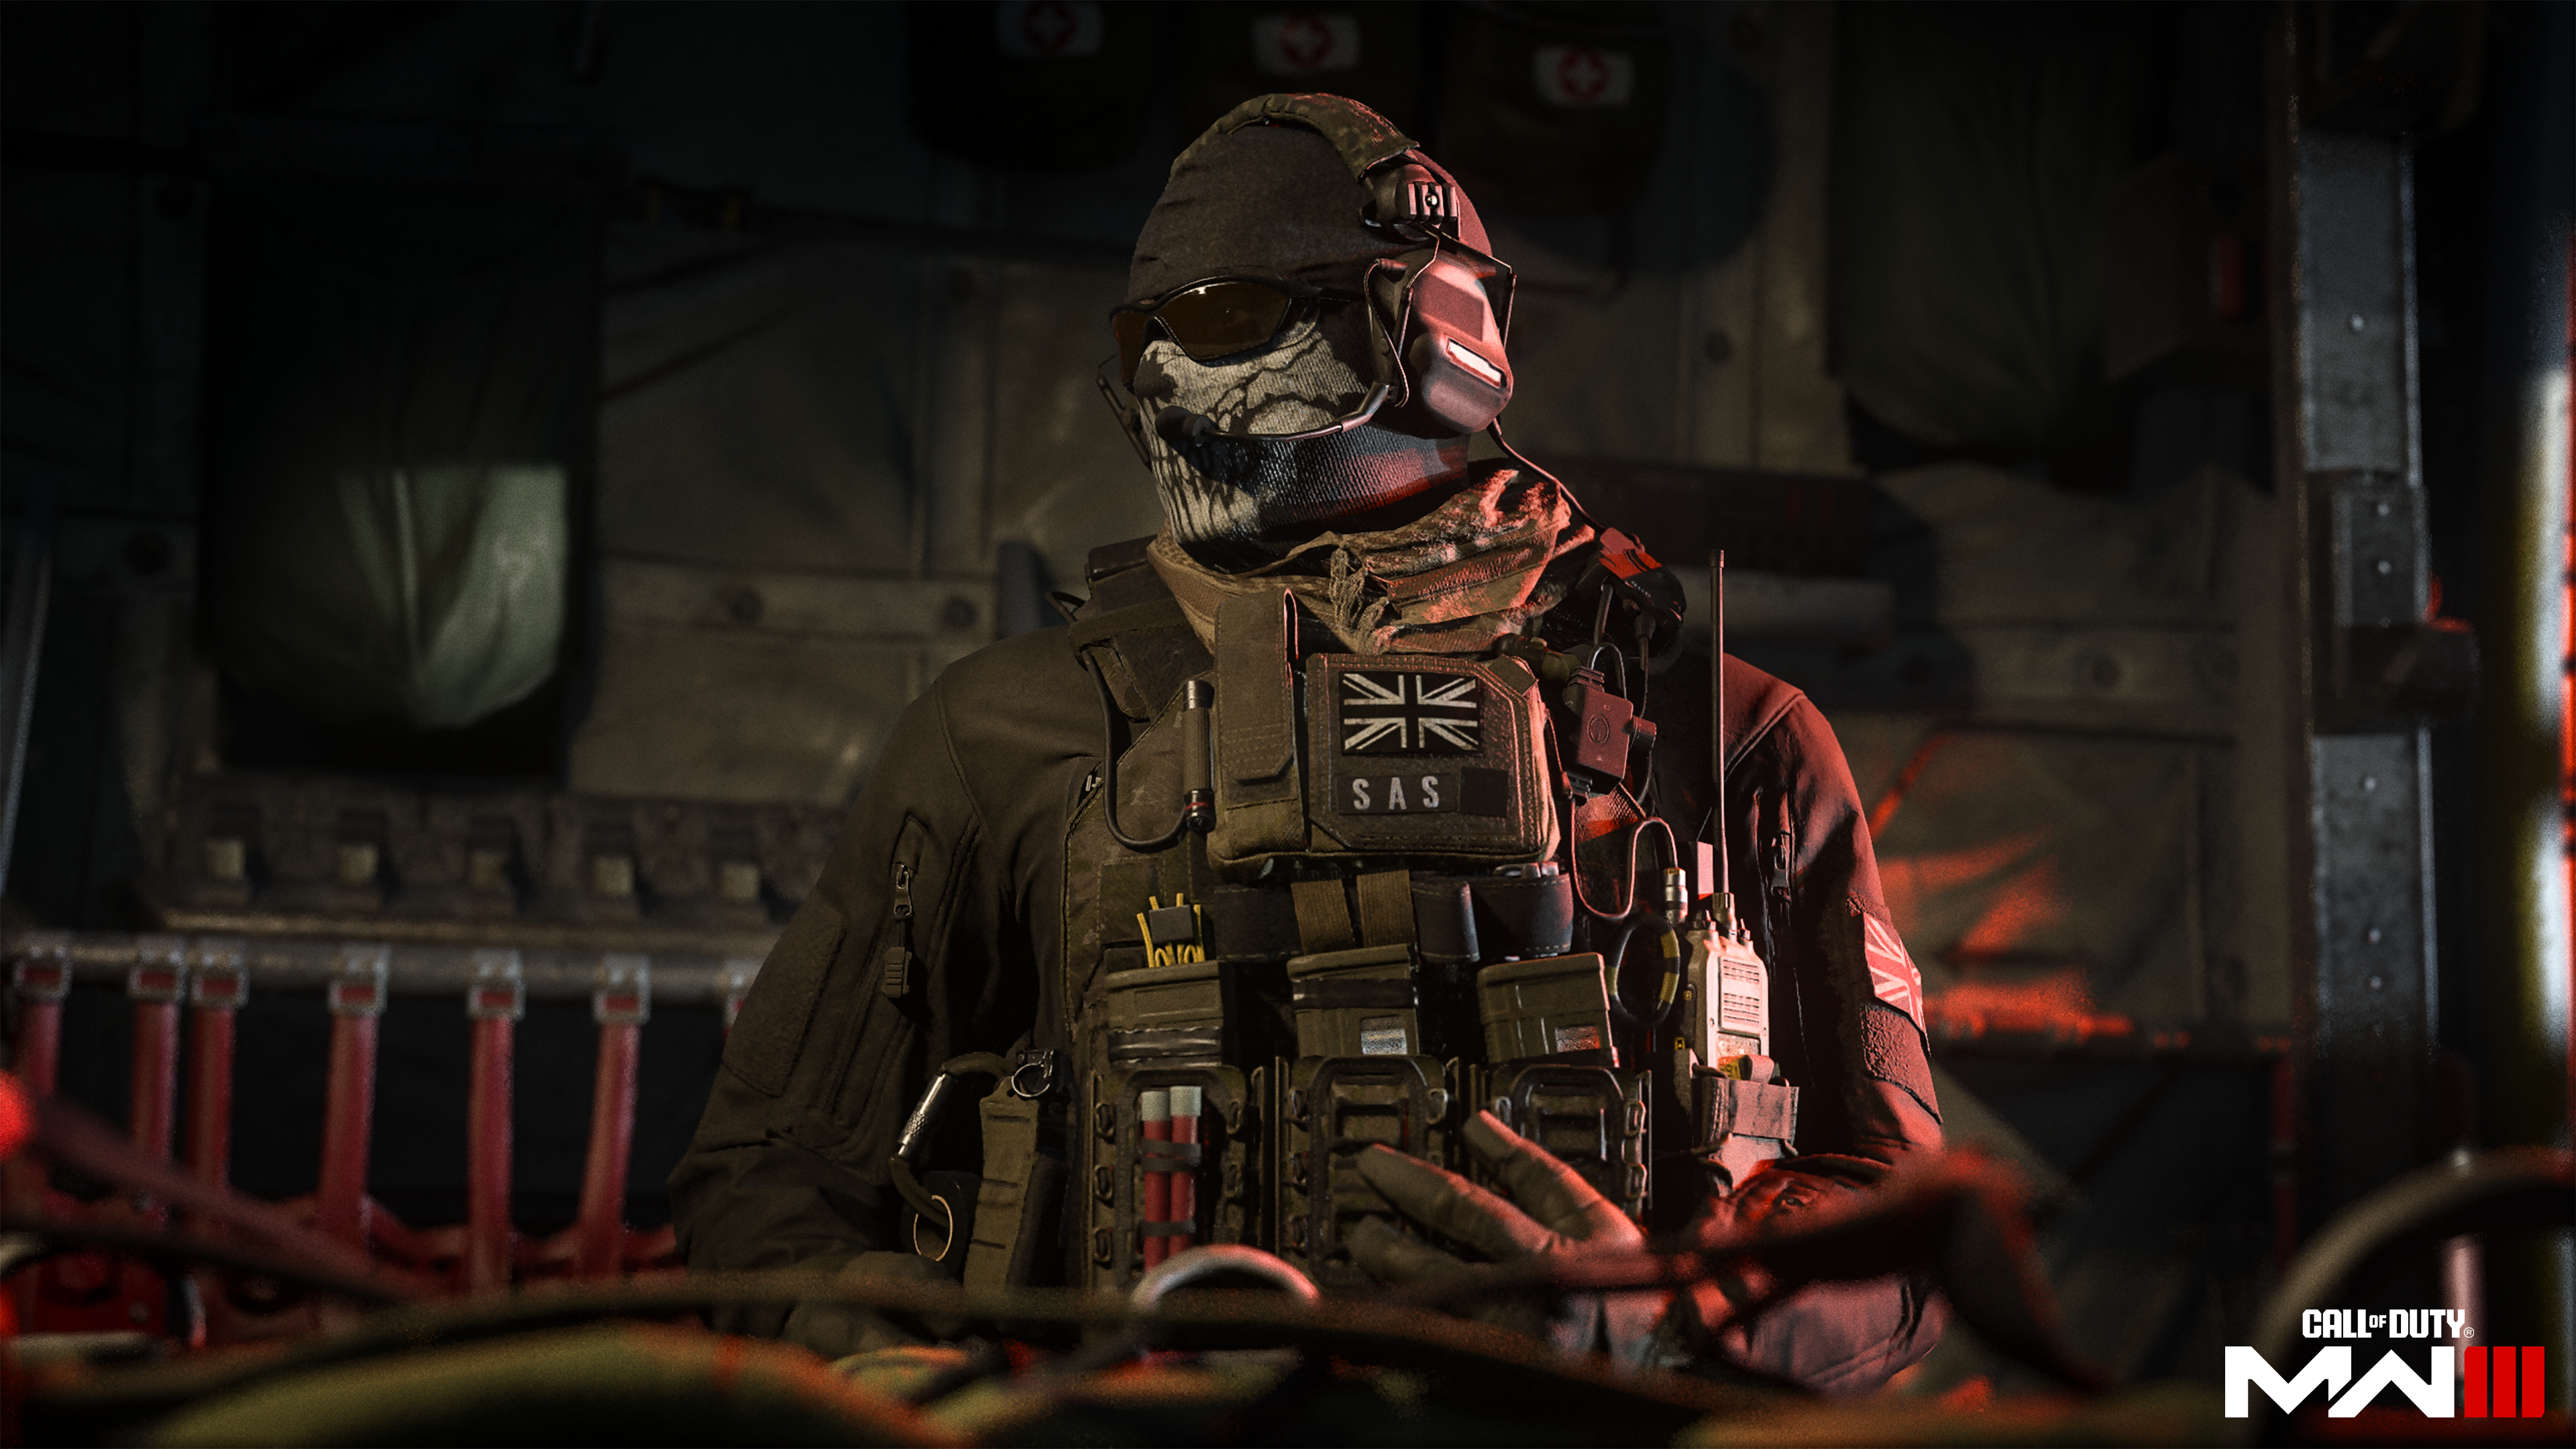 Call of Duty 2022 will reportedly feature the original actor for Ghost